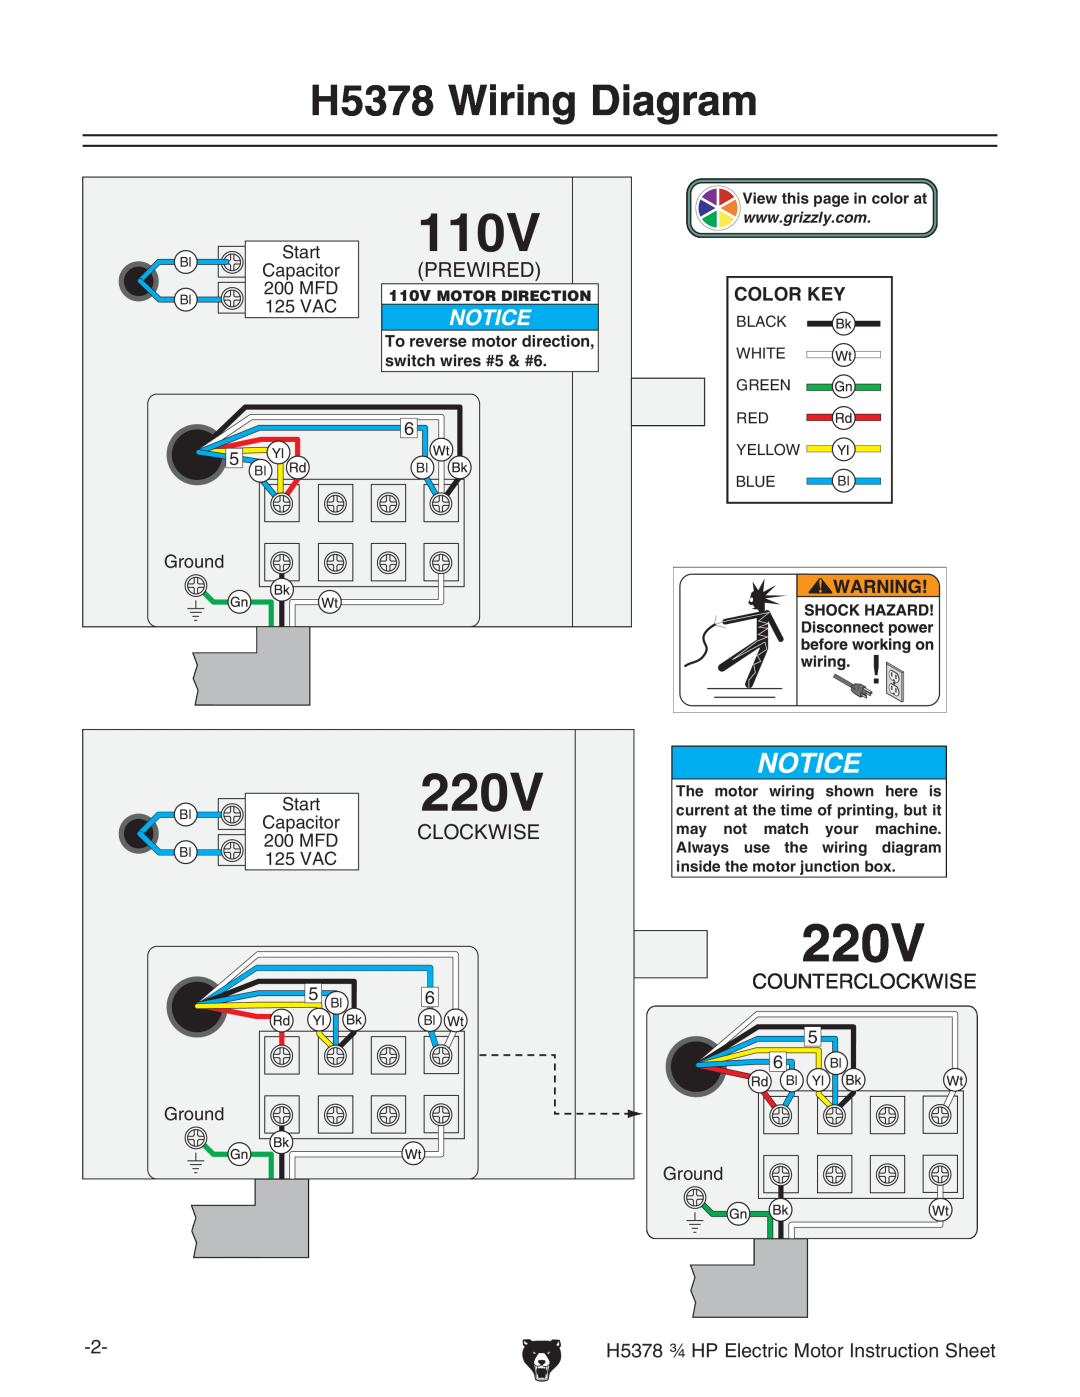 Grizzly instruction sheet H5378 Wiring Diagram, H5378 ¾ HP Electric Motor Instruction Sheet 